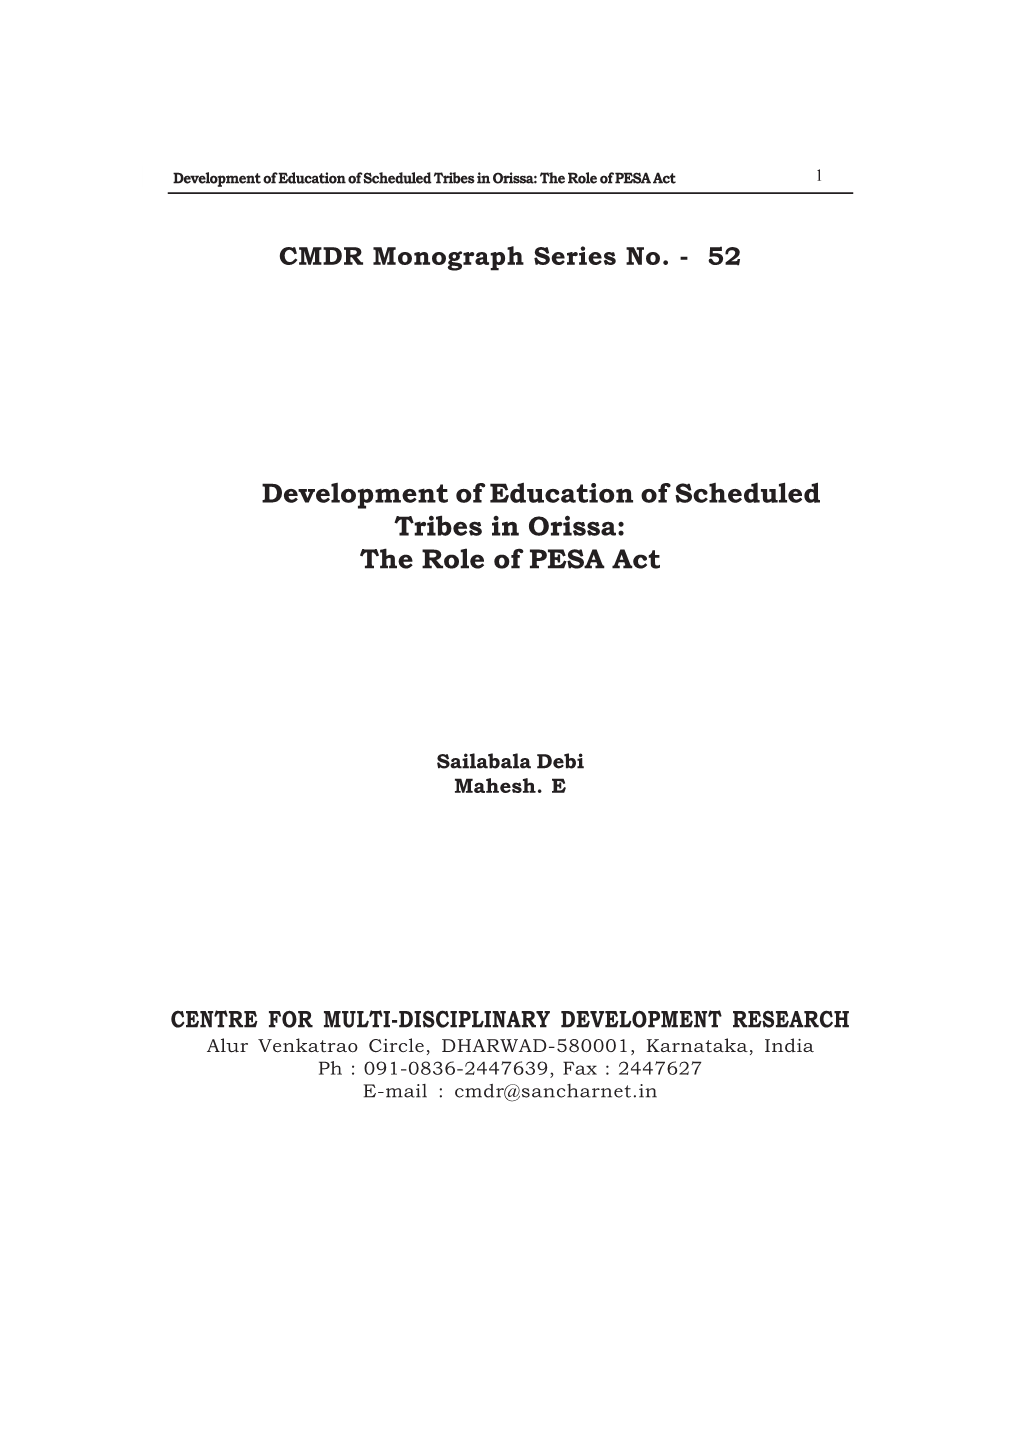 Development of Education of Scheduled Tribes in Orissa: the Role of PESA Act